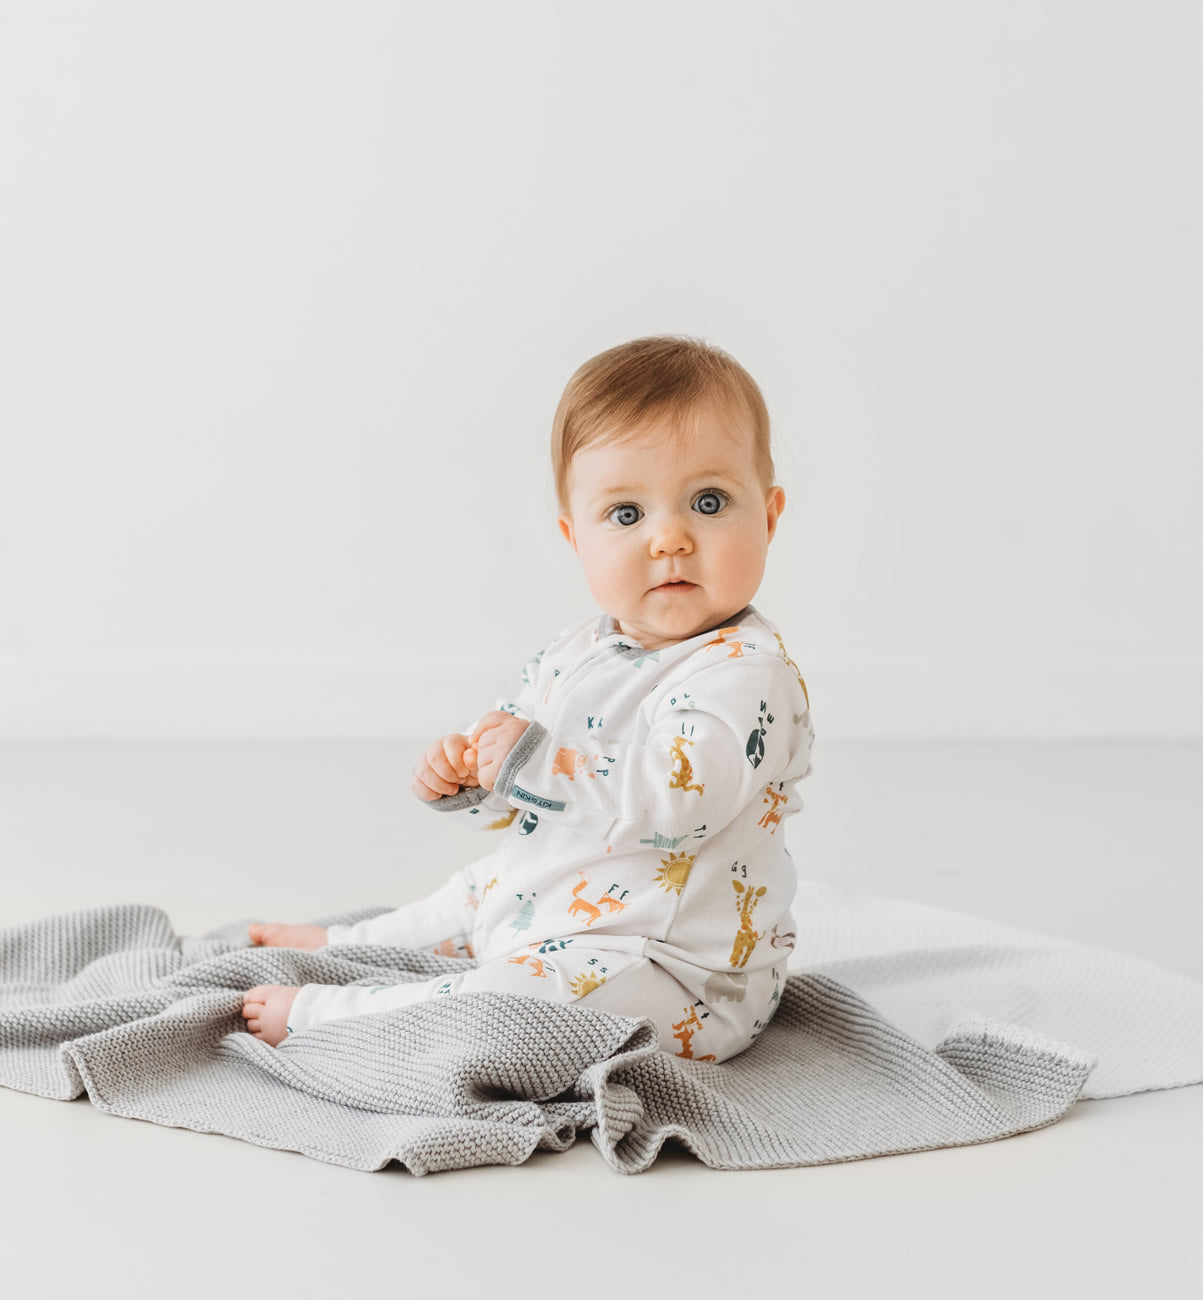 Kit & Kin sustainable All-in-one 3 to 6 months